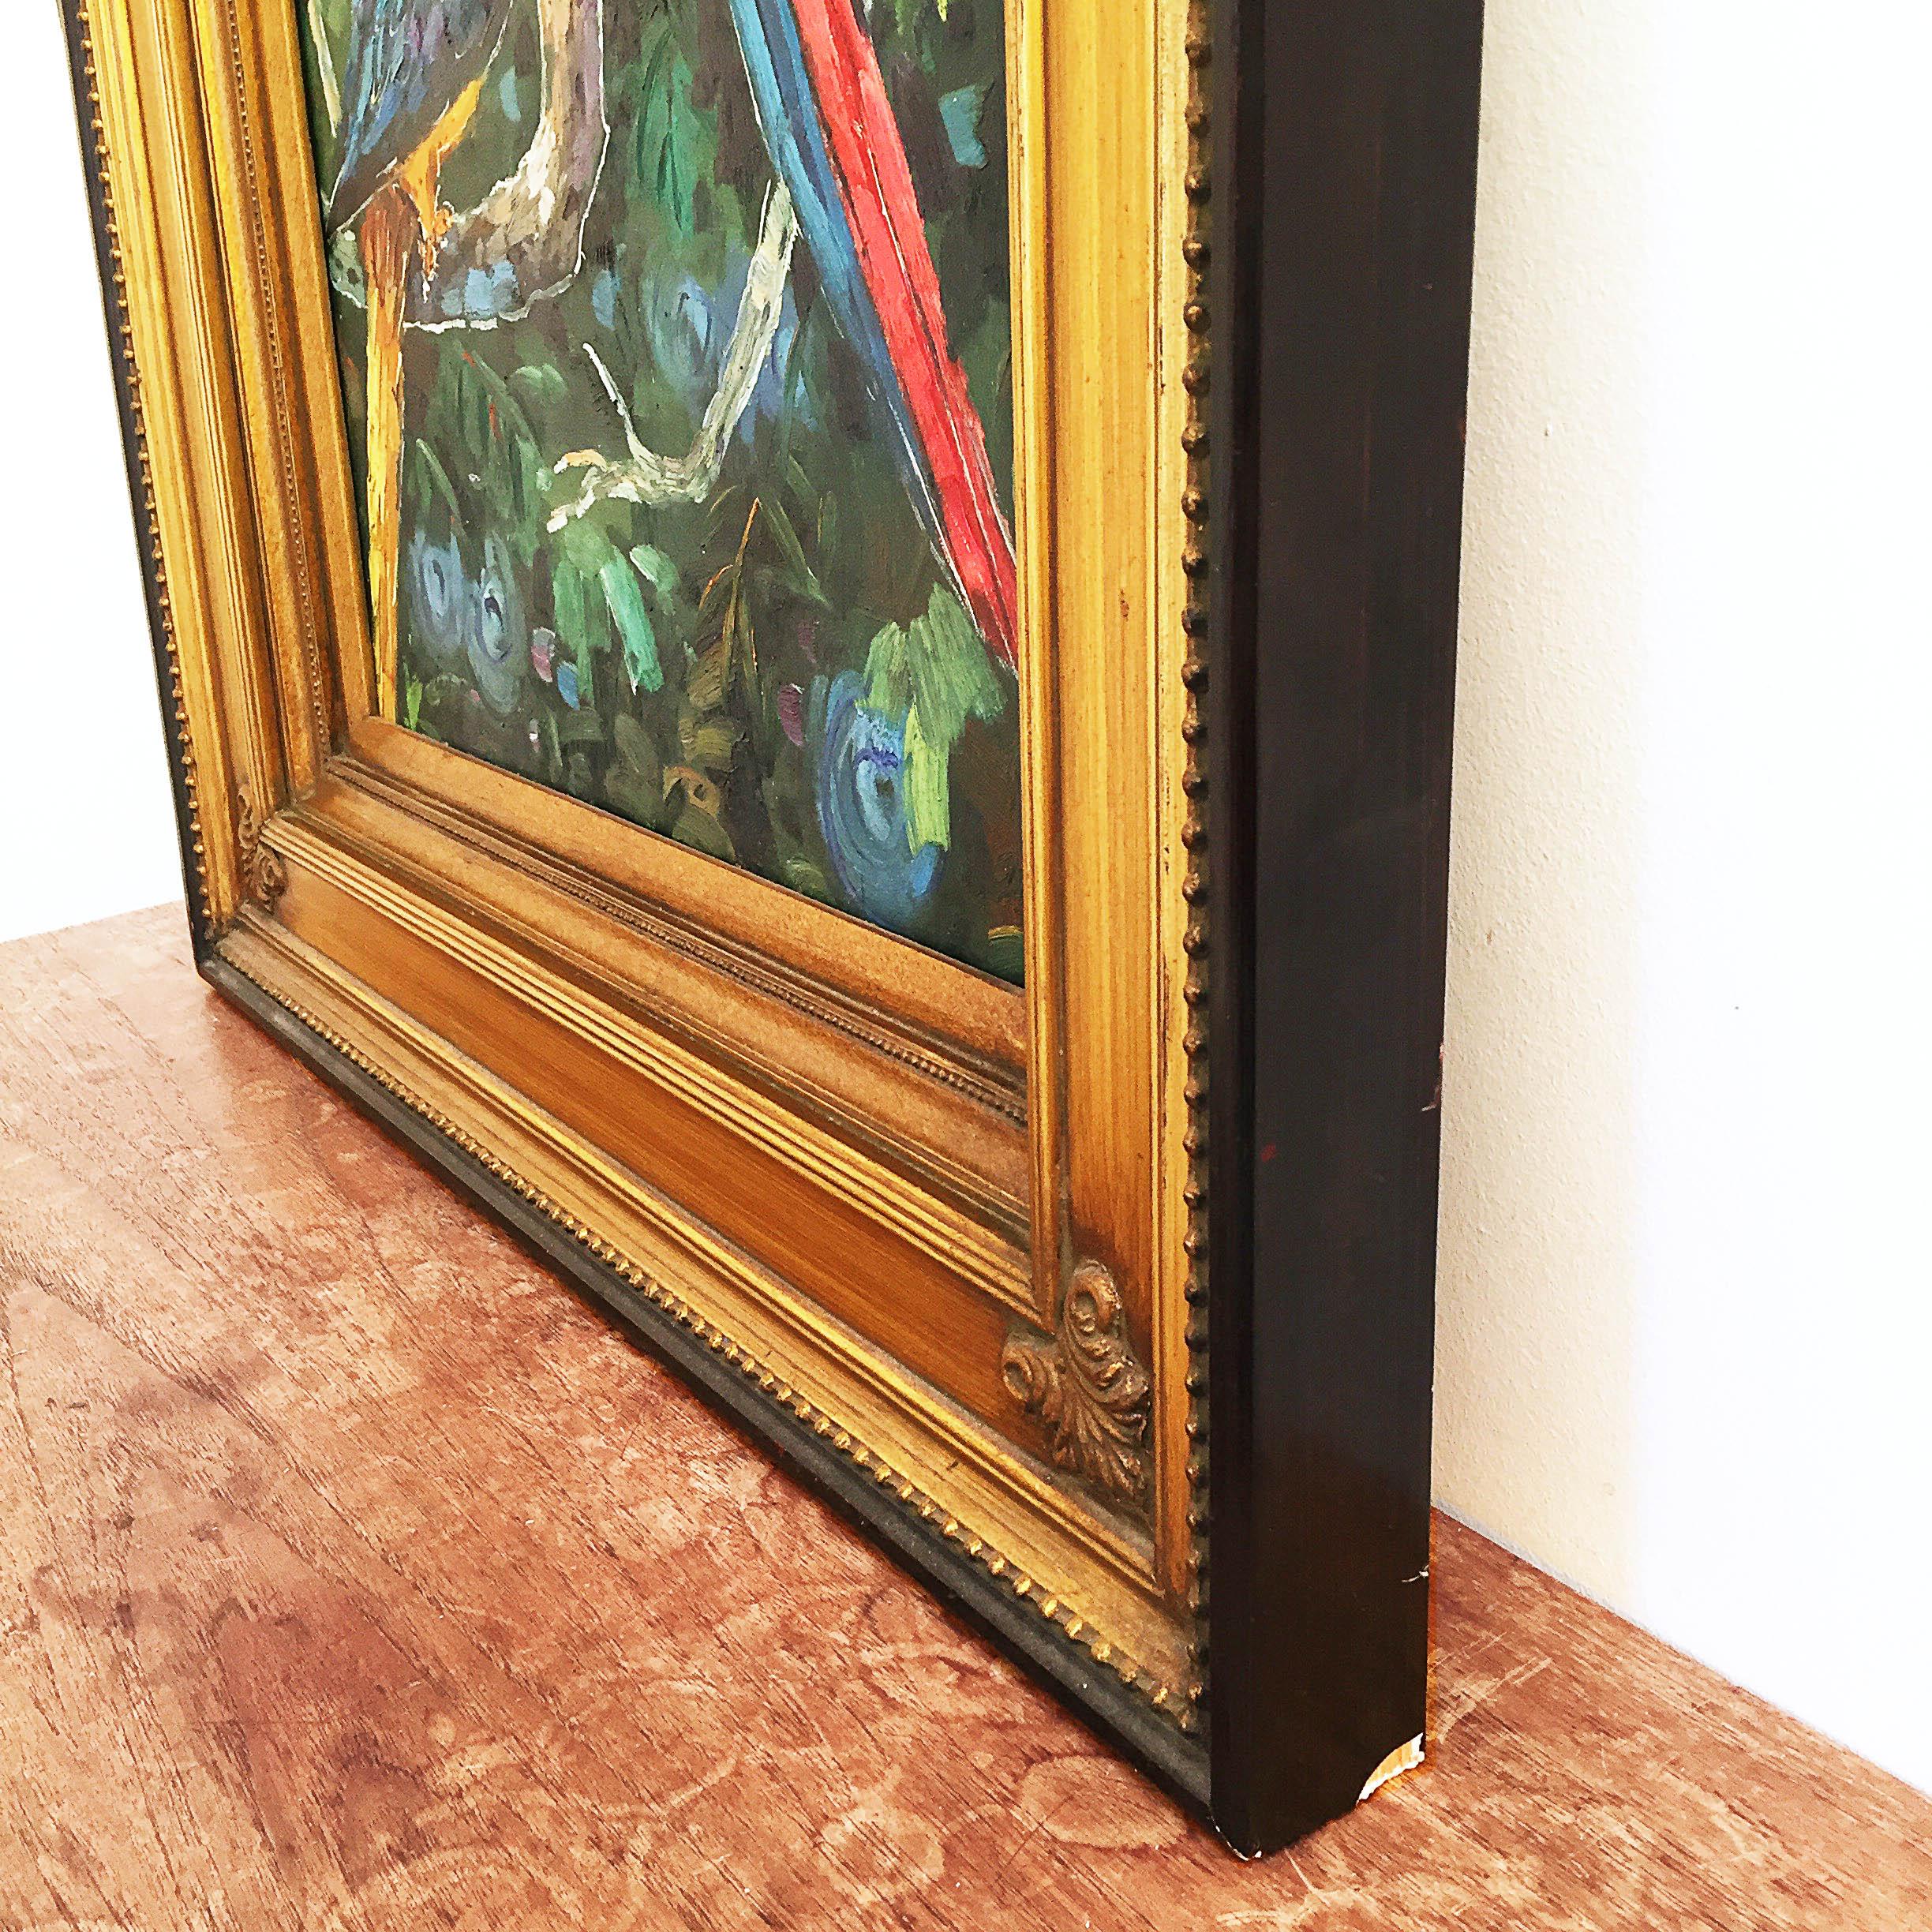 Exotic Pair of Parrots Painting 1990s Oil on Canvas Gold Frame For Sale 1